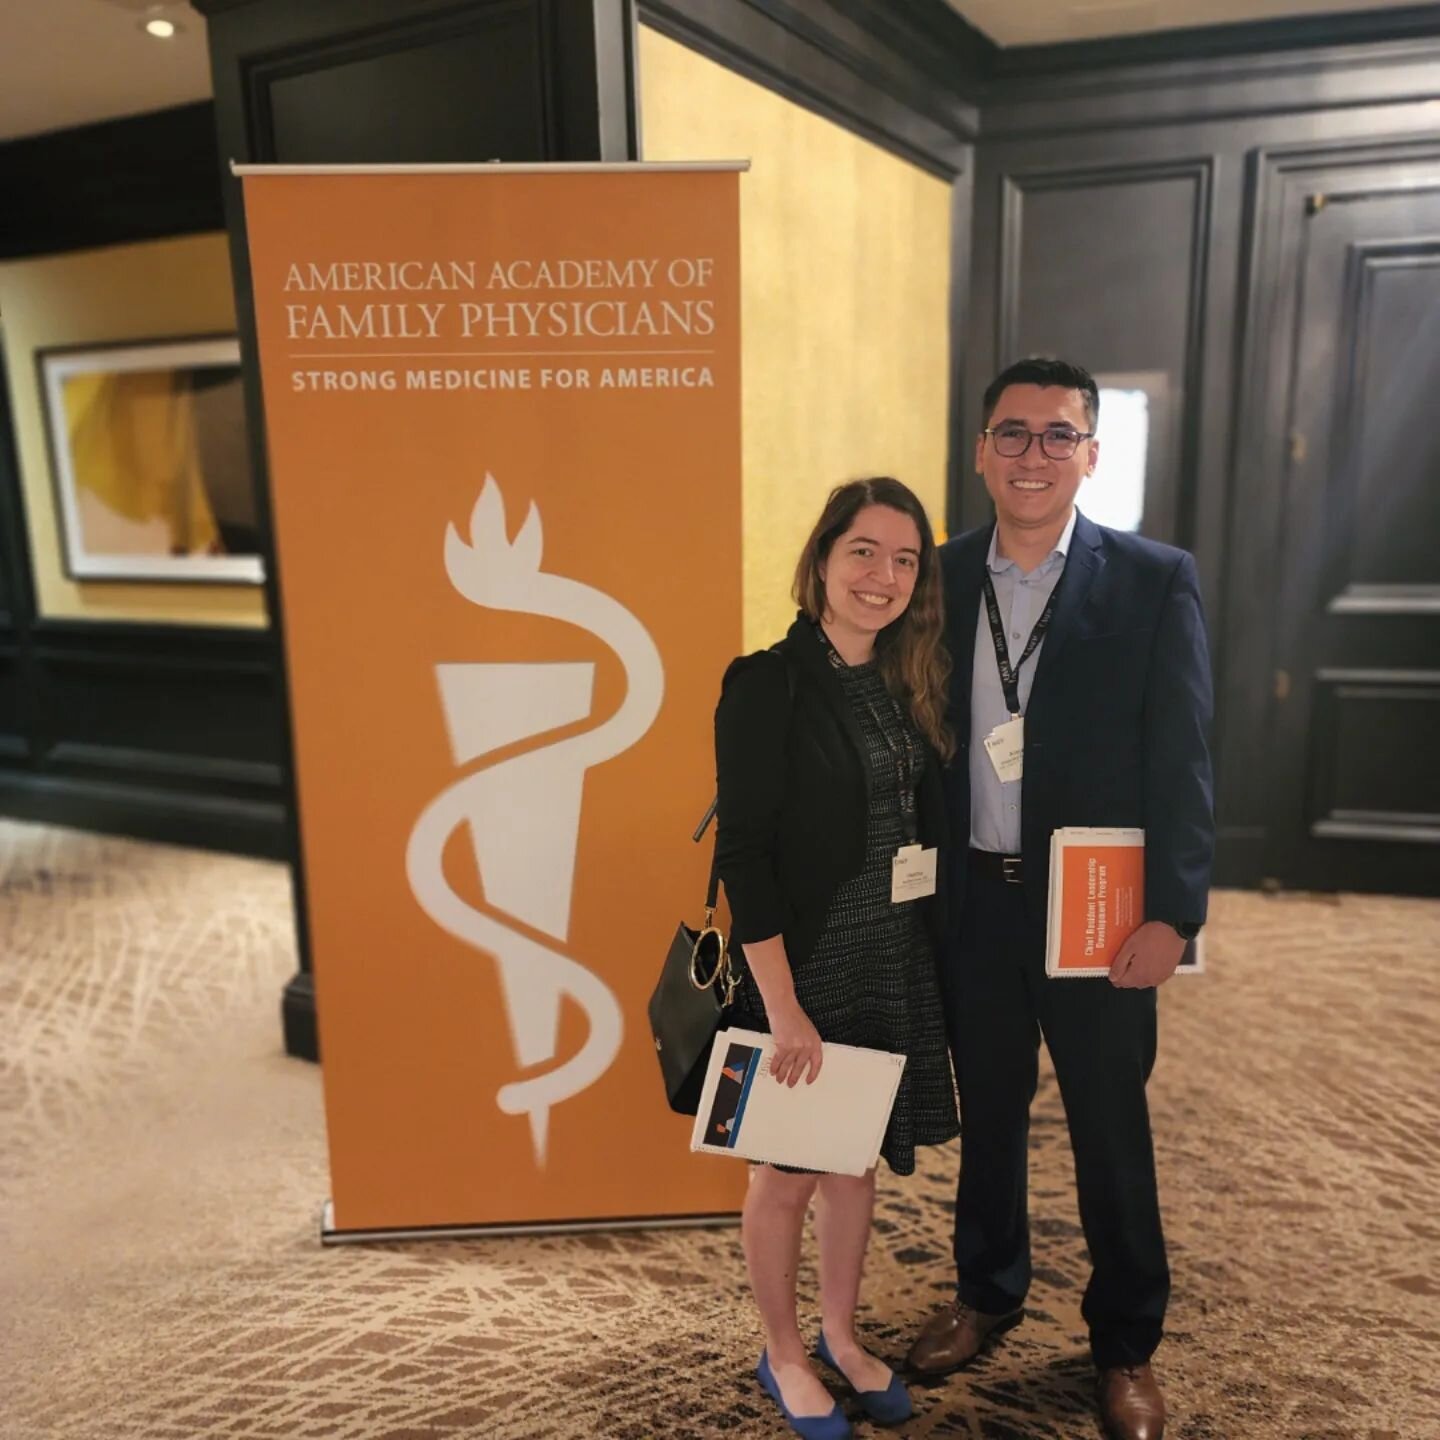 Our 2022-2023 chief residents Dr. Cohen and Dr. Castellanos, at the 2022 @the_aafp Chief resident leadership development program, learning useful skills to put into practice for next academic year. Excited to see what new ideas they can bring home fo